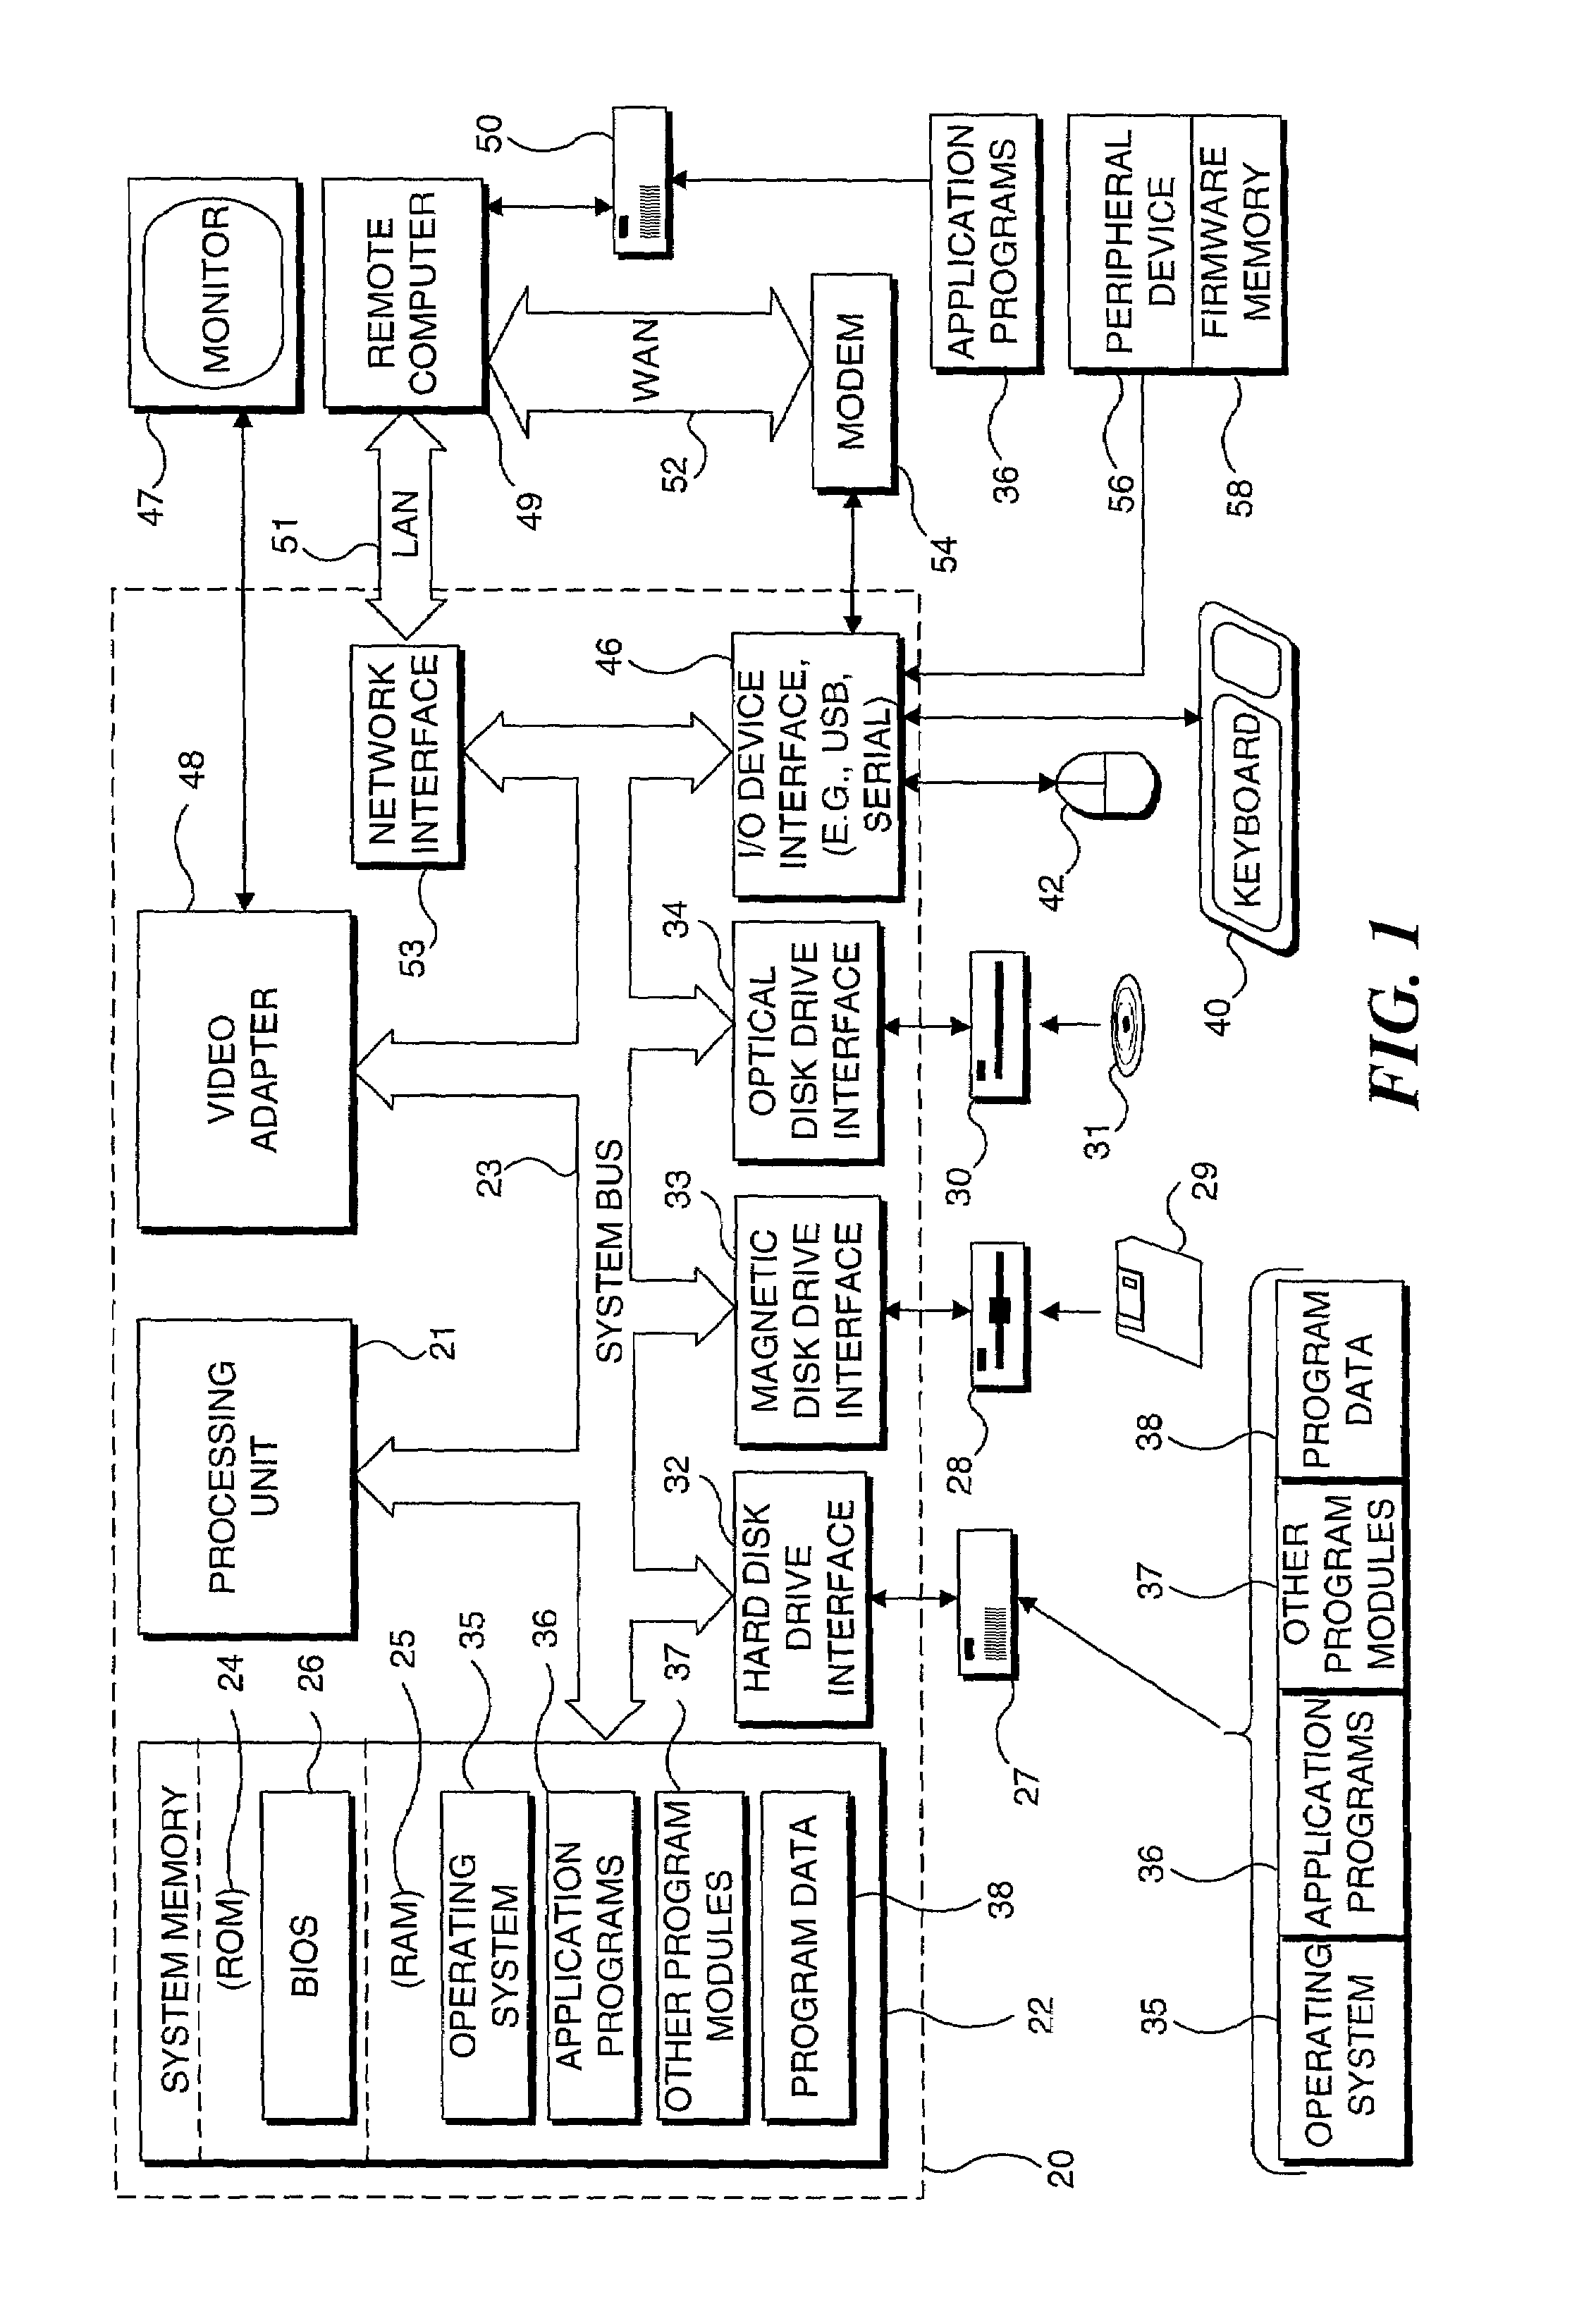 Method and system to access software pertinent to an electronic peripheral device based on an address stored in a peripheral device